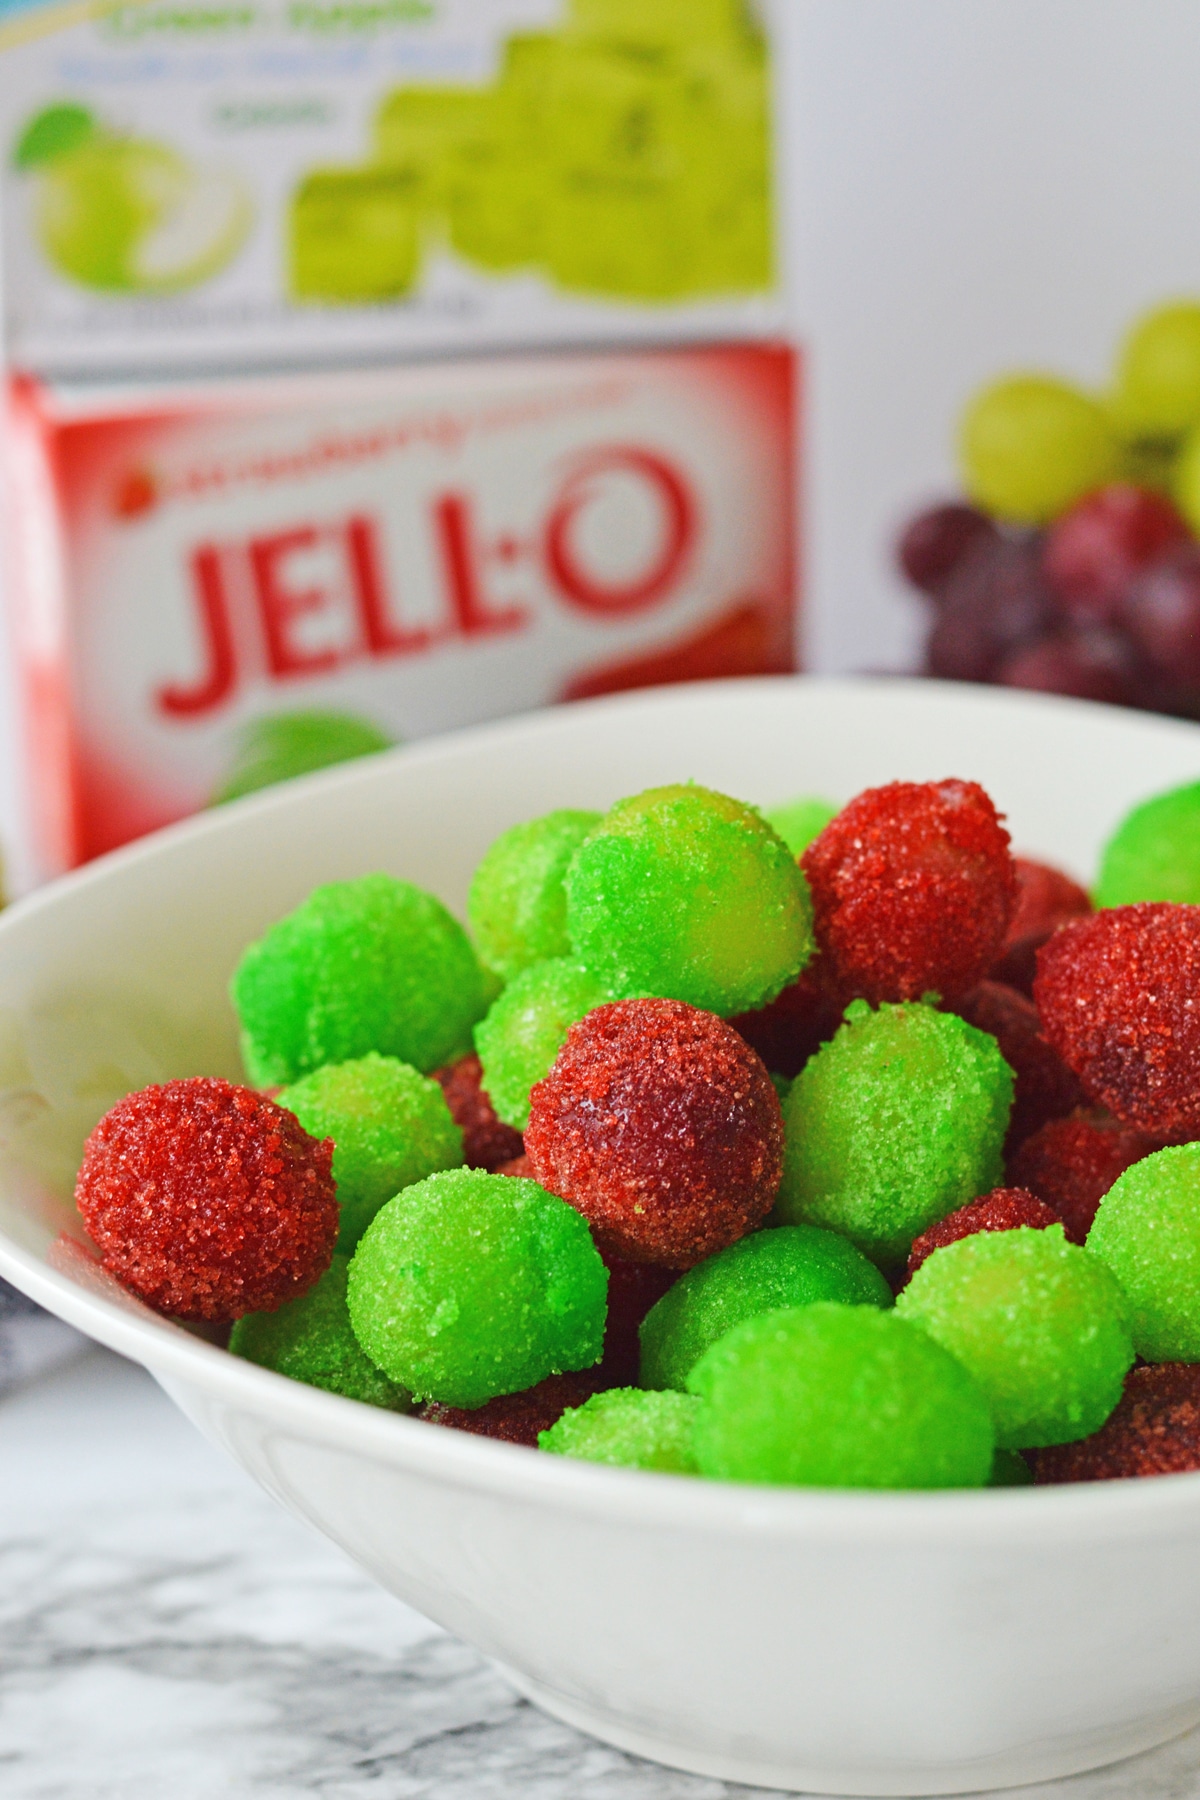 A closer look on frozen grapes with jello